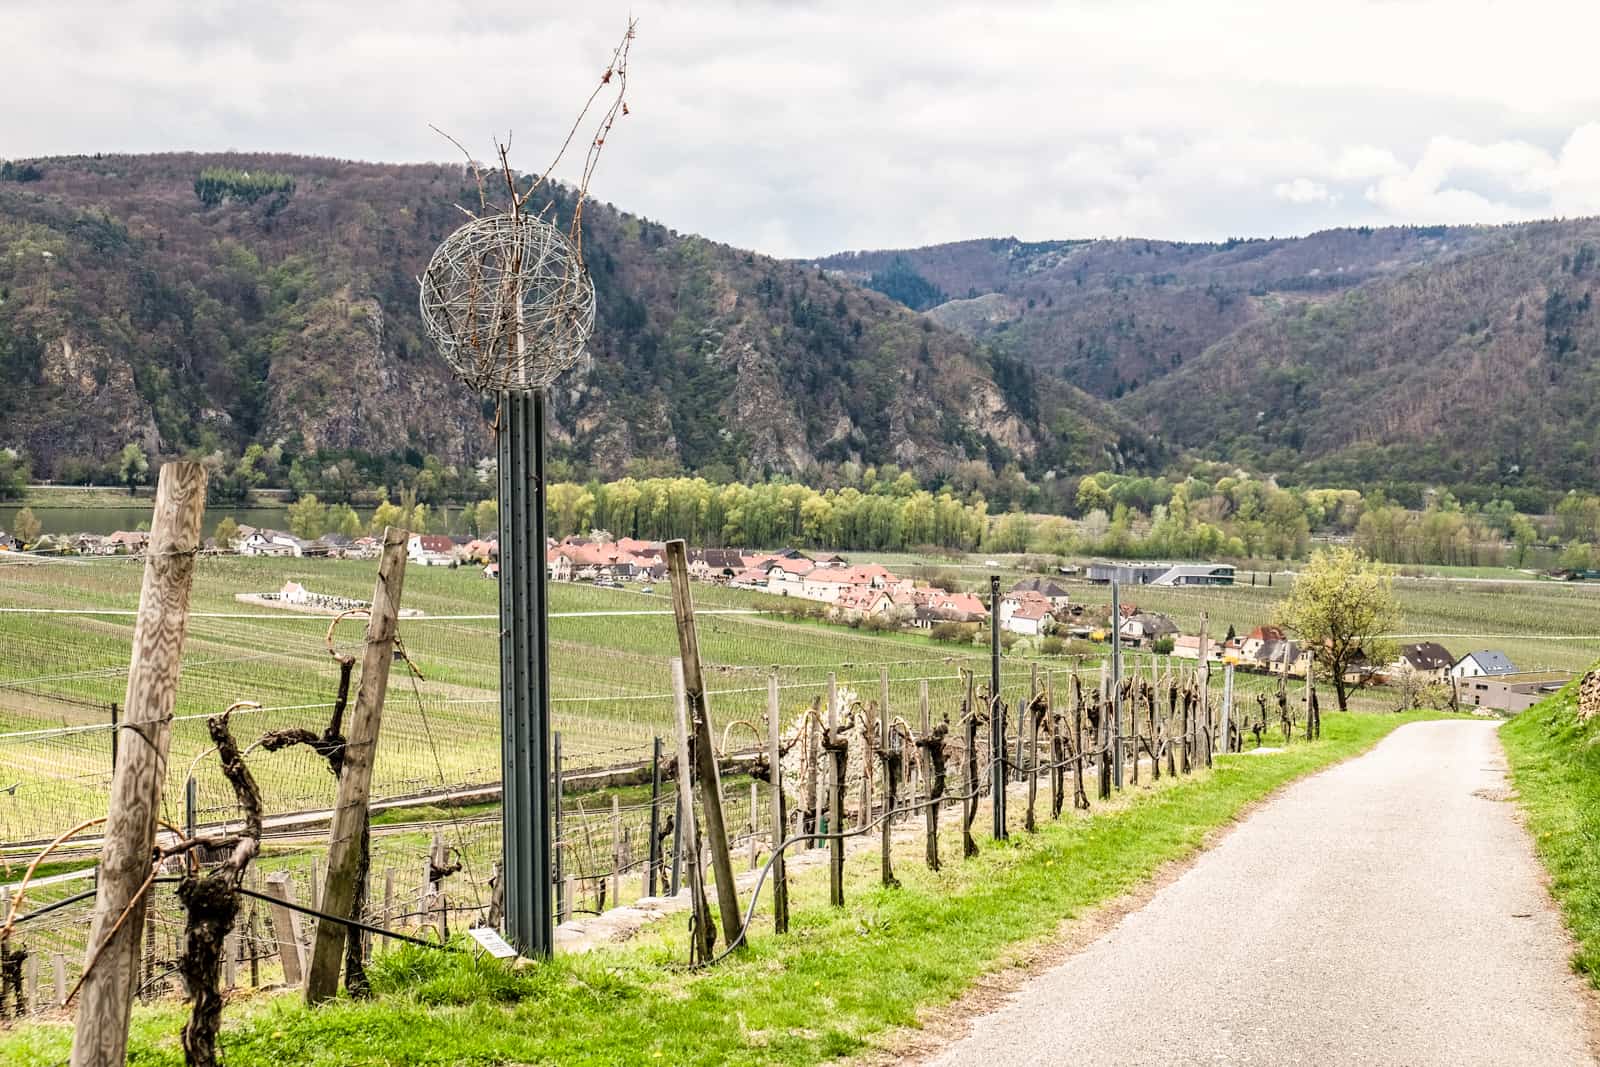 A pathway on The Wachau World Heritage Trail with a metal pole art sculpture to the left, leading down to a village marked by a cluster of houses